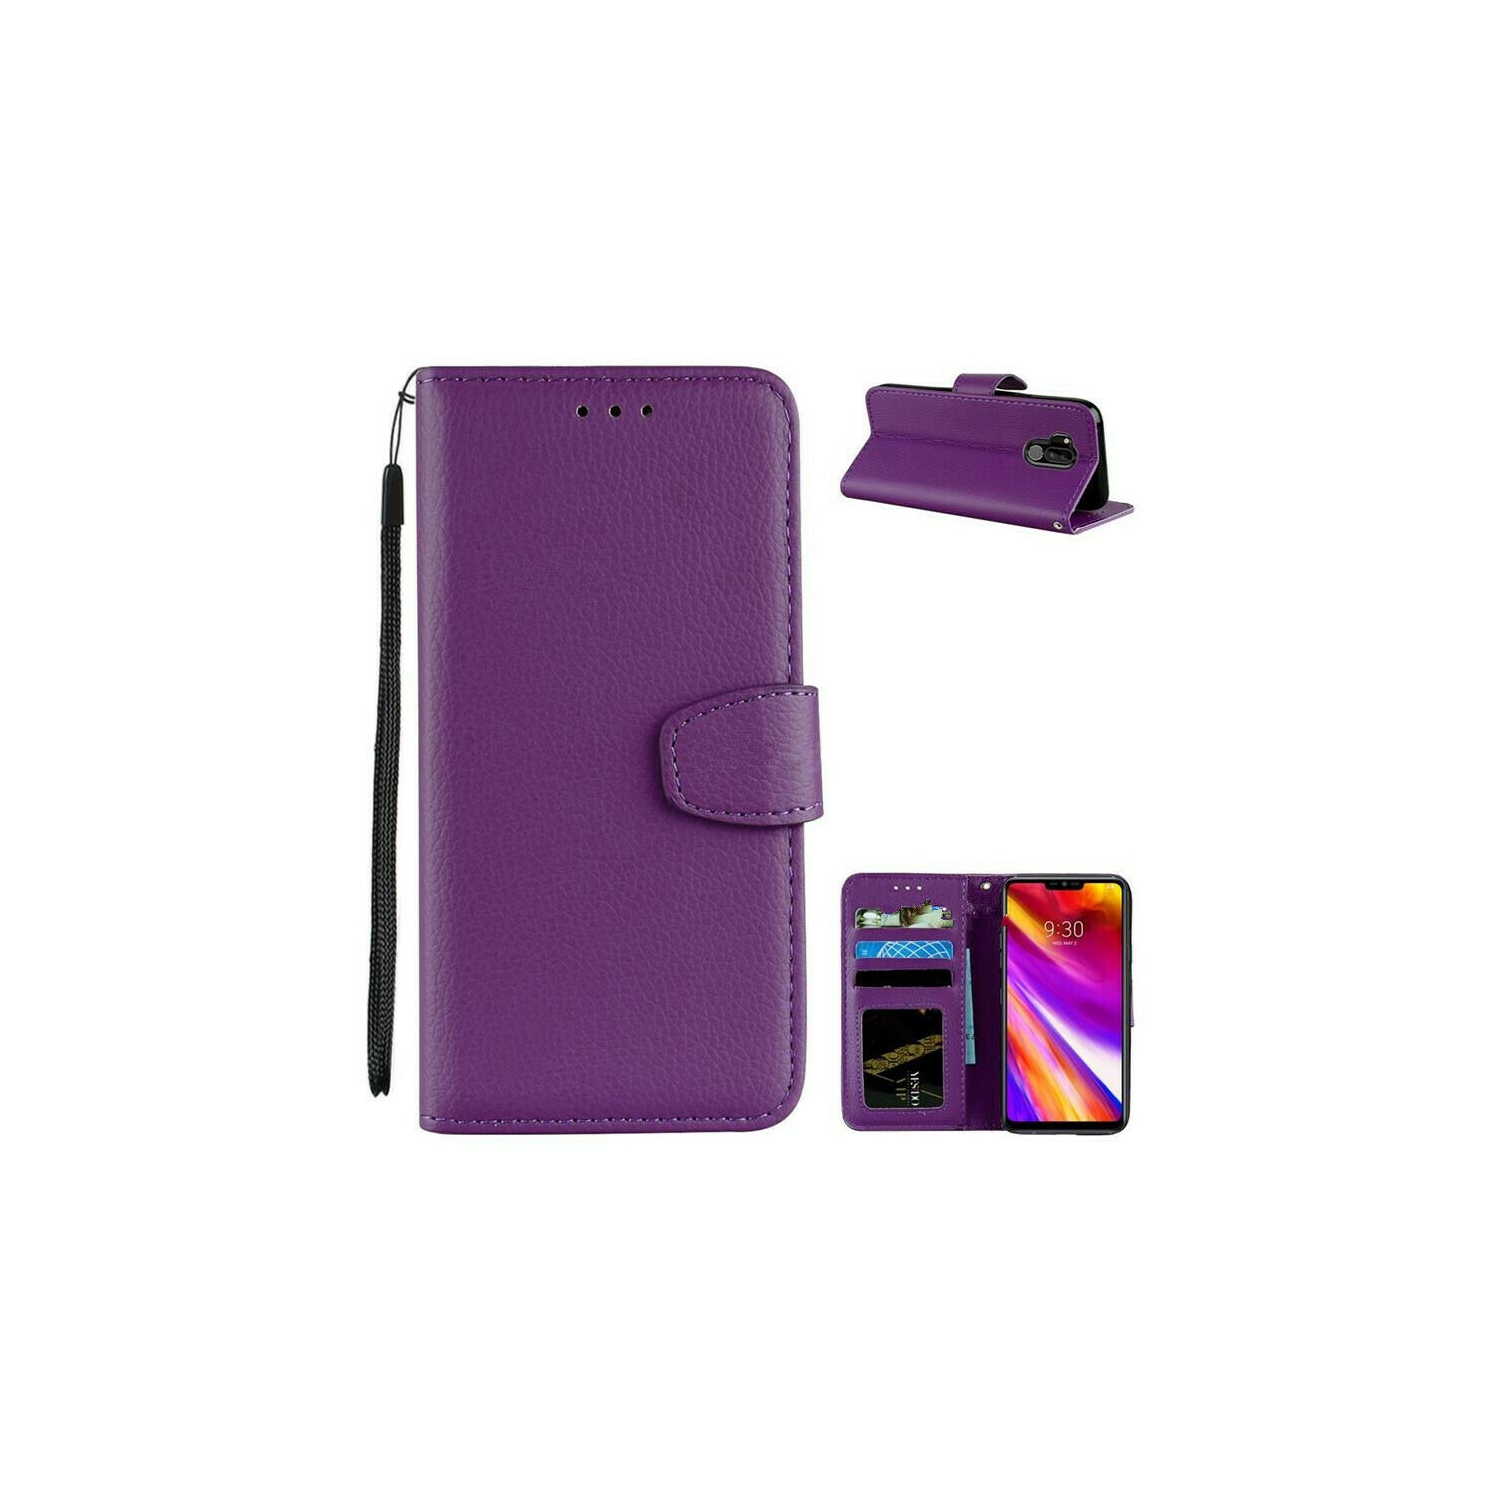 【CSmart】 Magnetic Card Slot Leather Folio Wallet Flip Case Cover for LG G7 ThinQ / G7 One, Purple